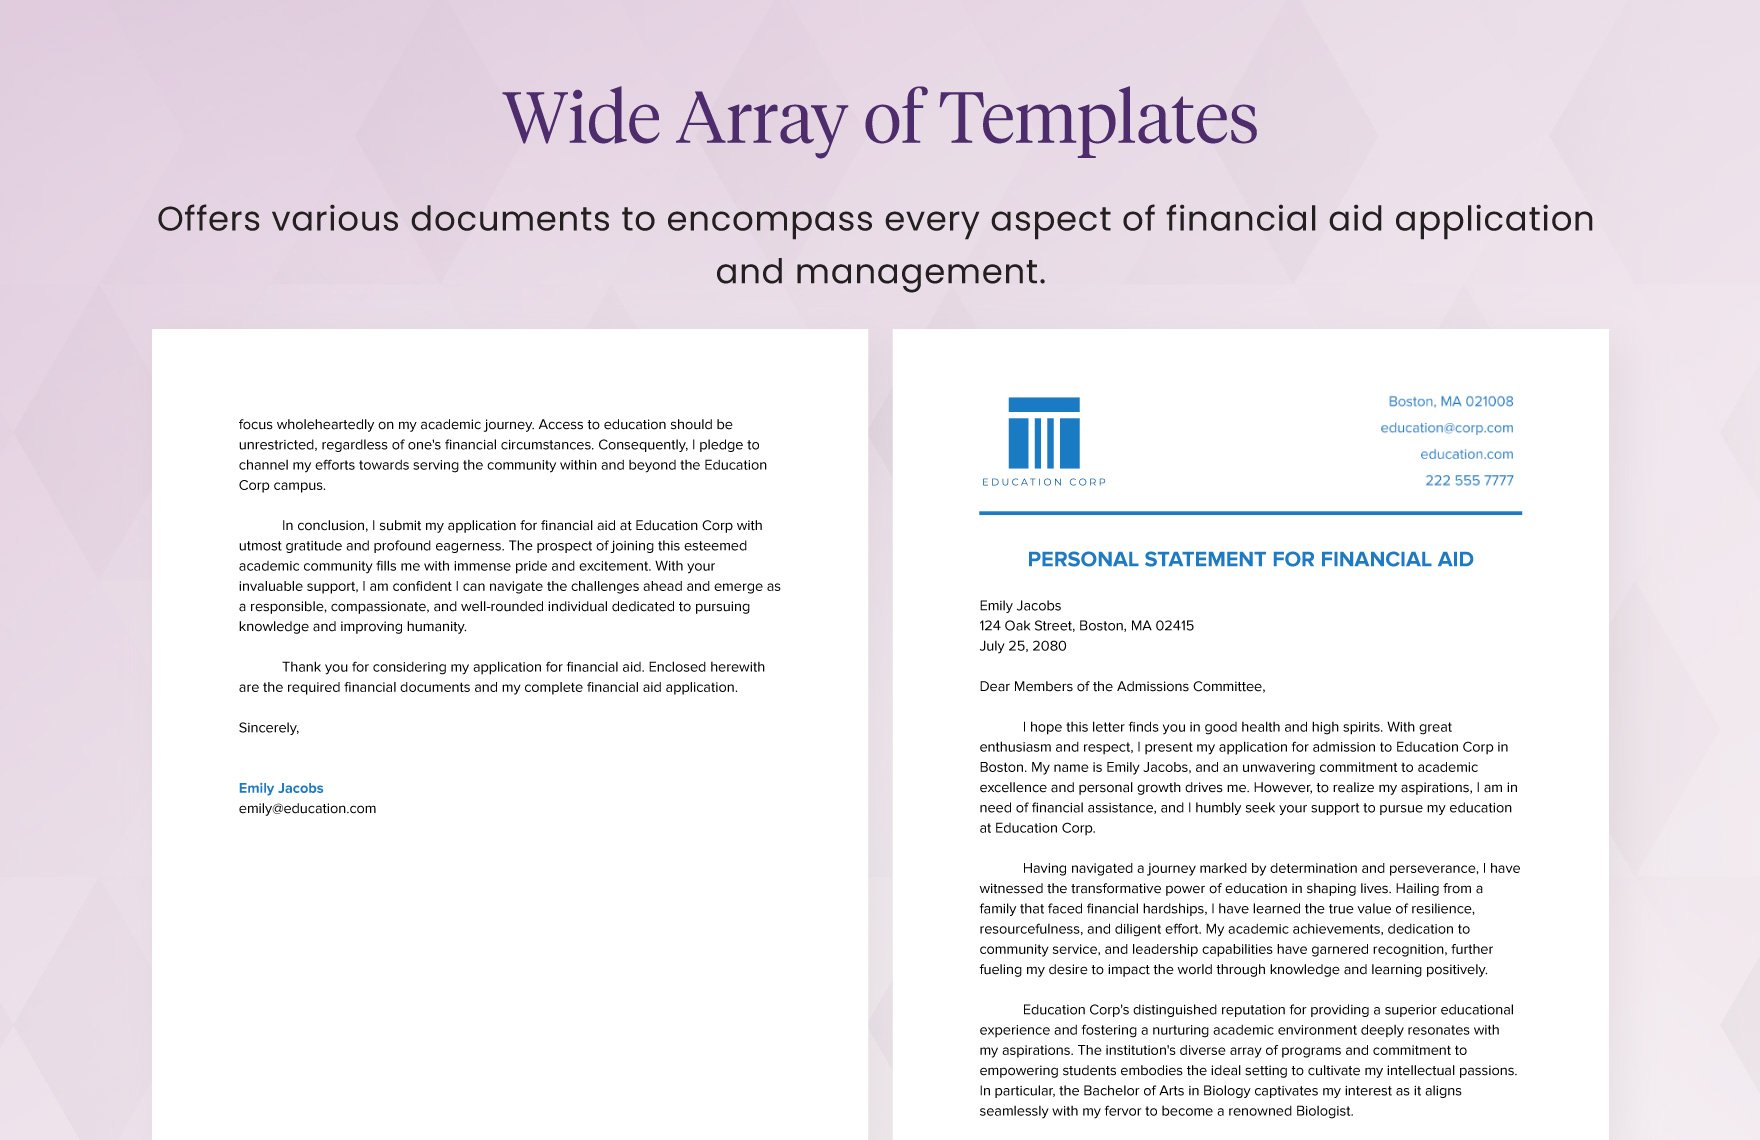 Personal Statement for Financial Aid Template